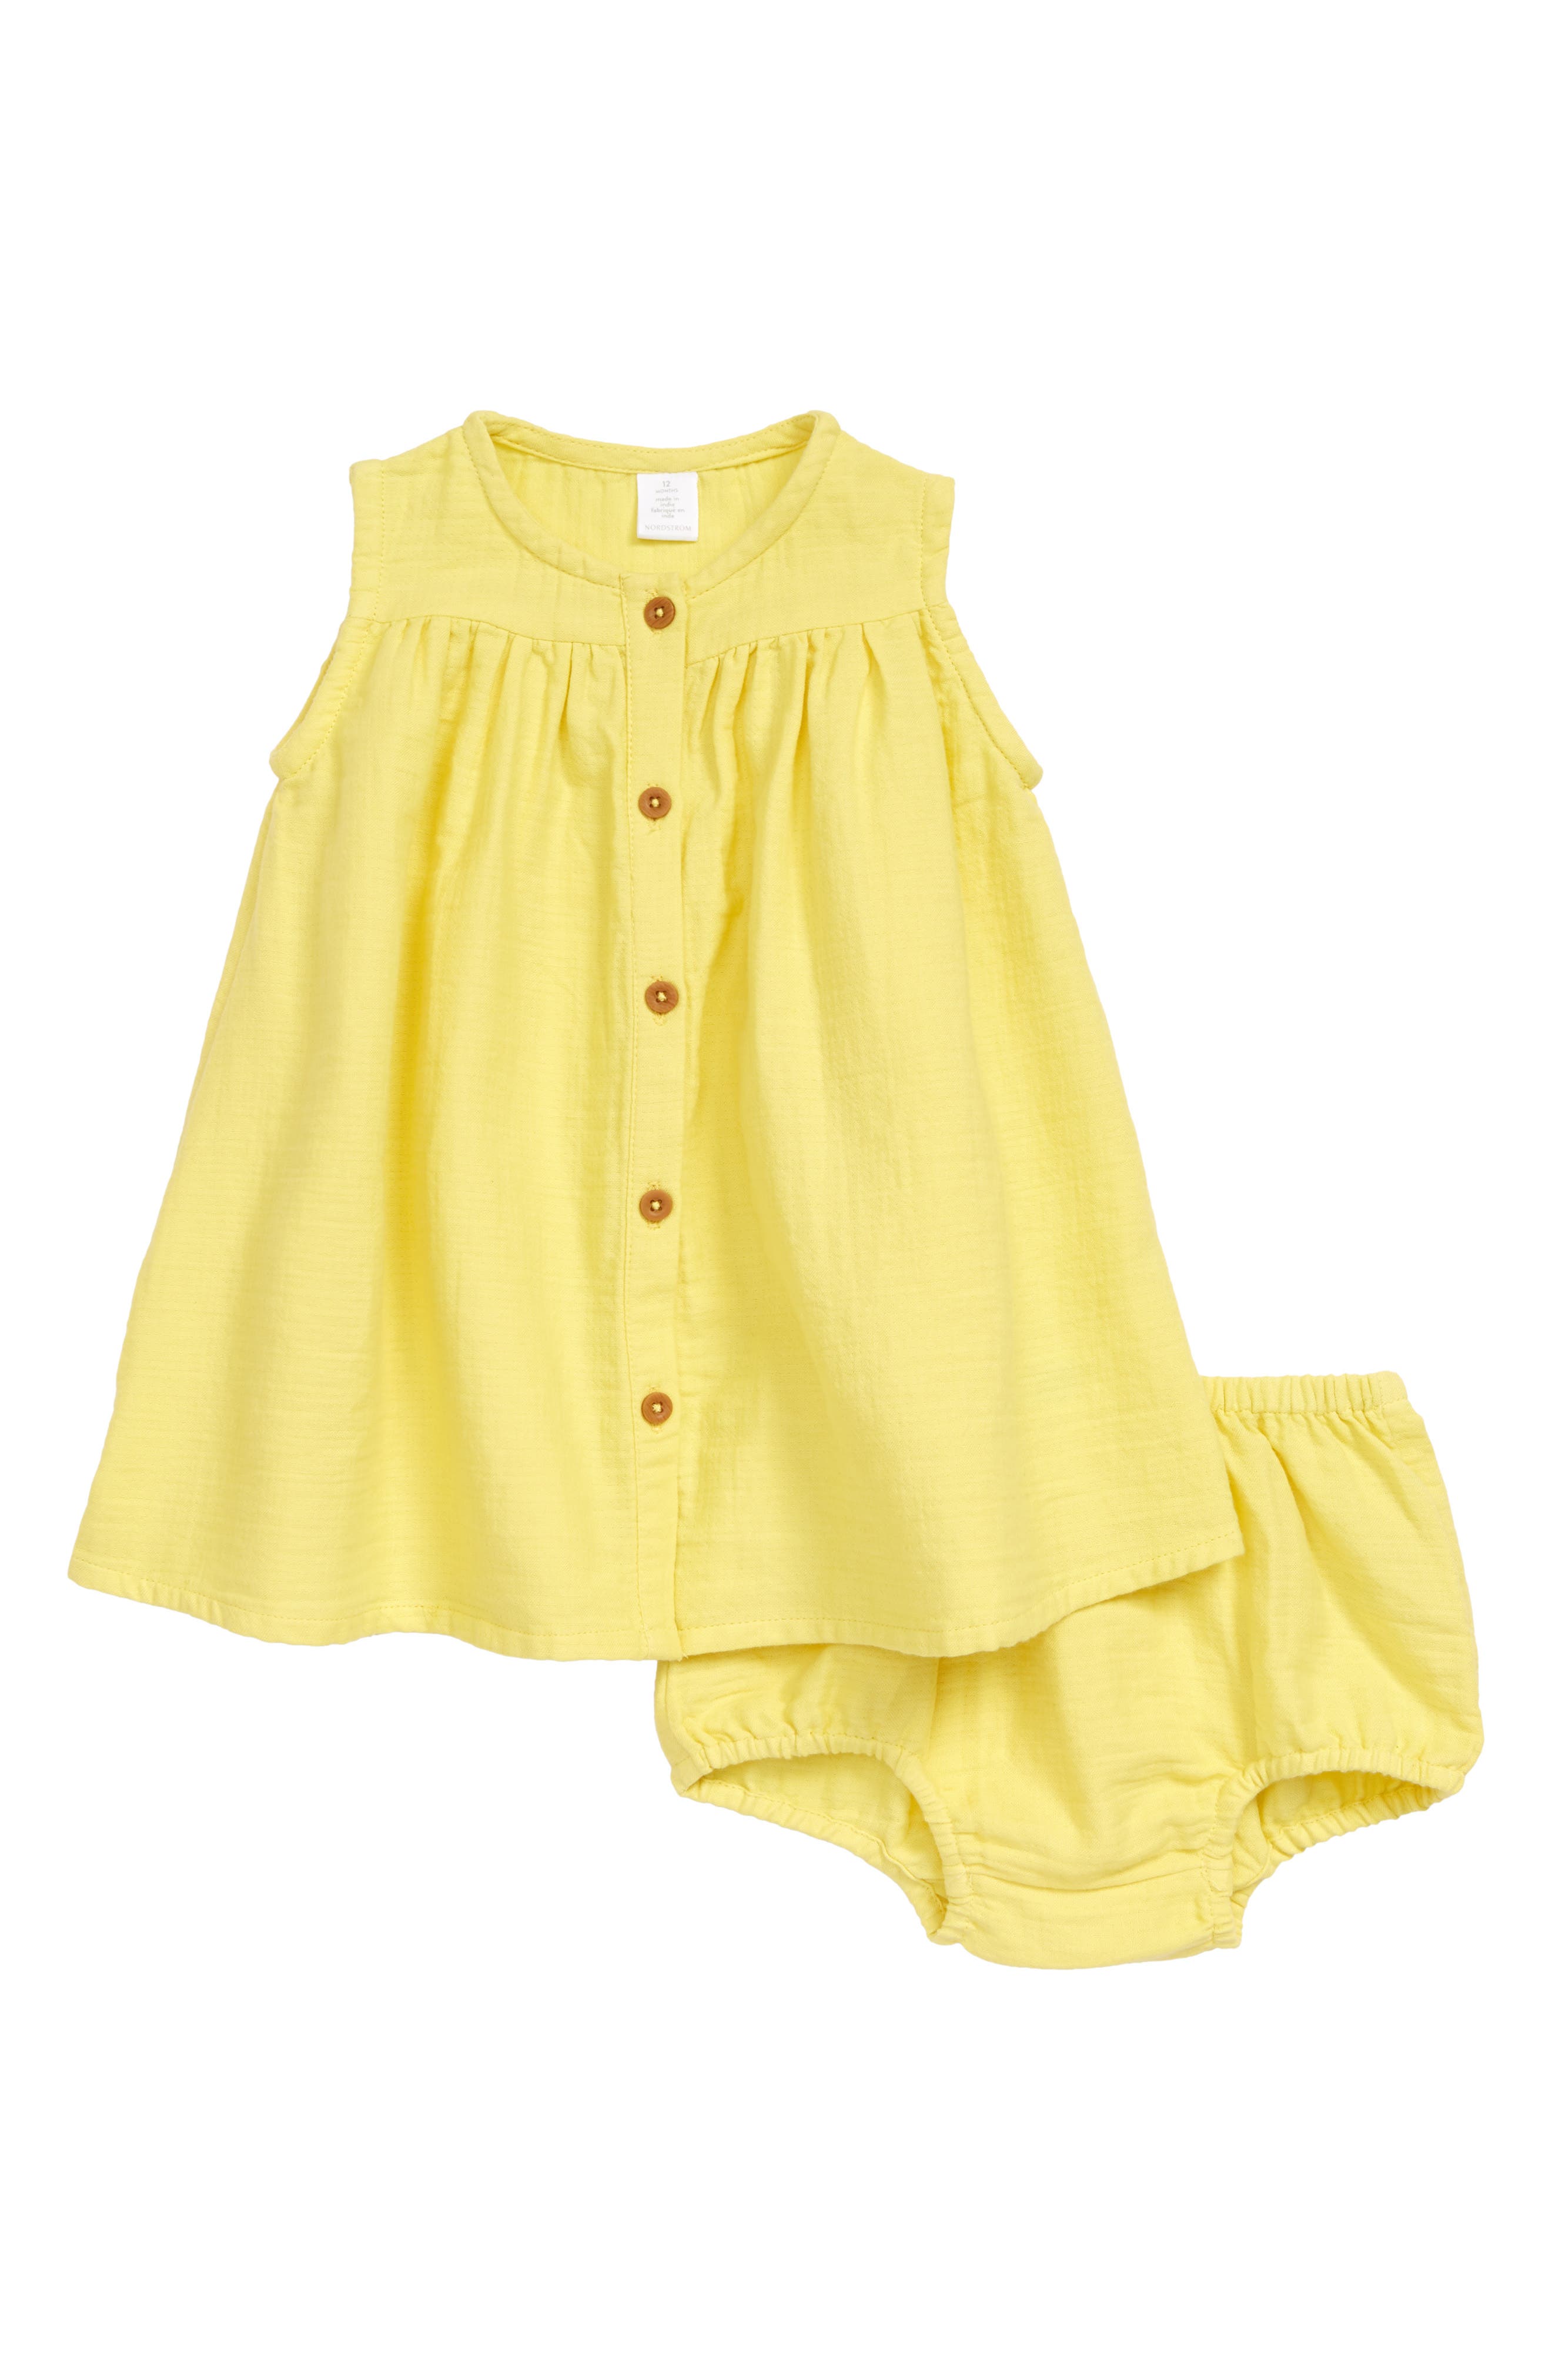 baby girl clothes nordstrom